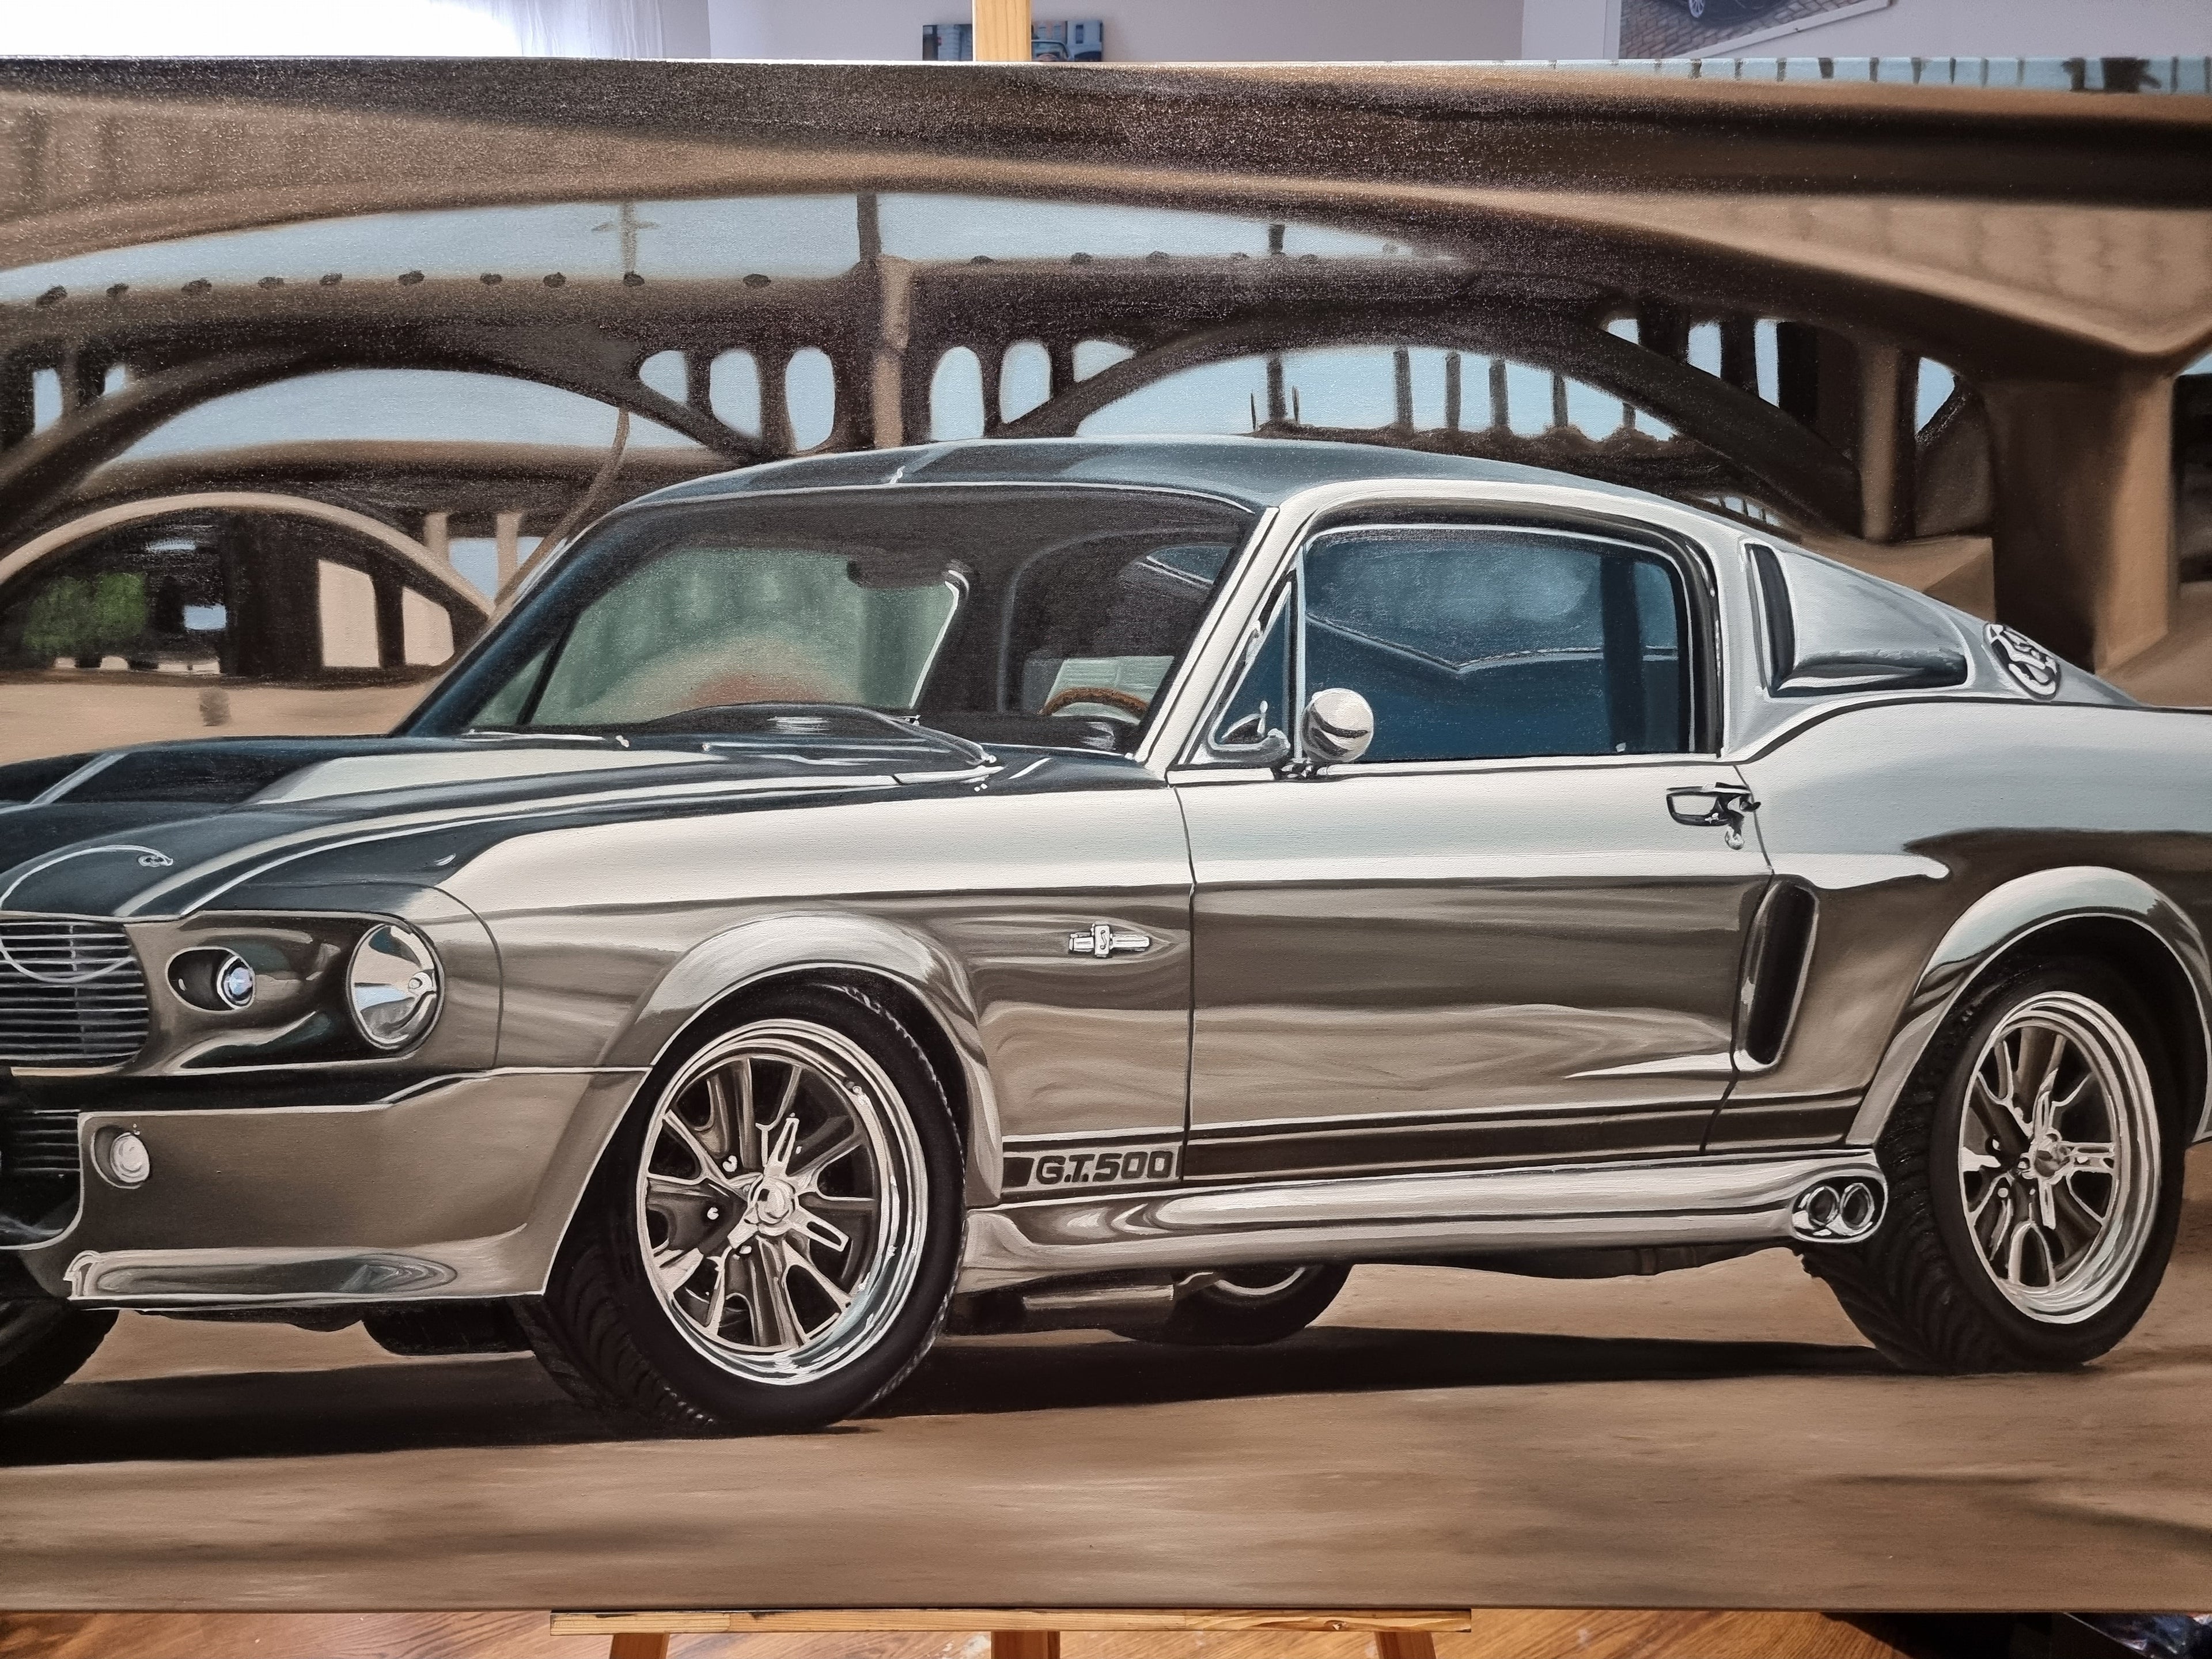 Ford Mustang GT500 Original Oil Painting on Canvas